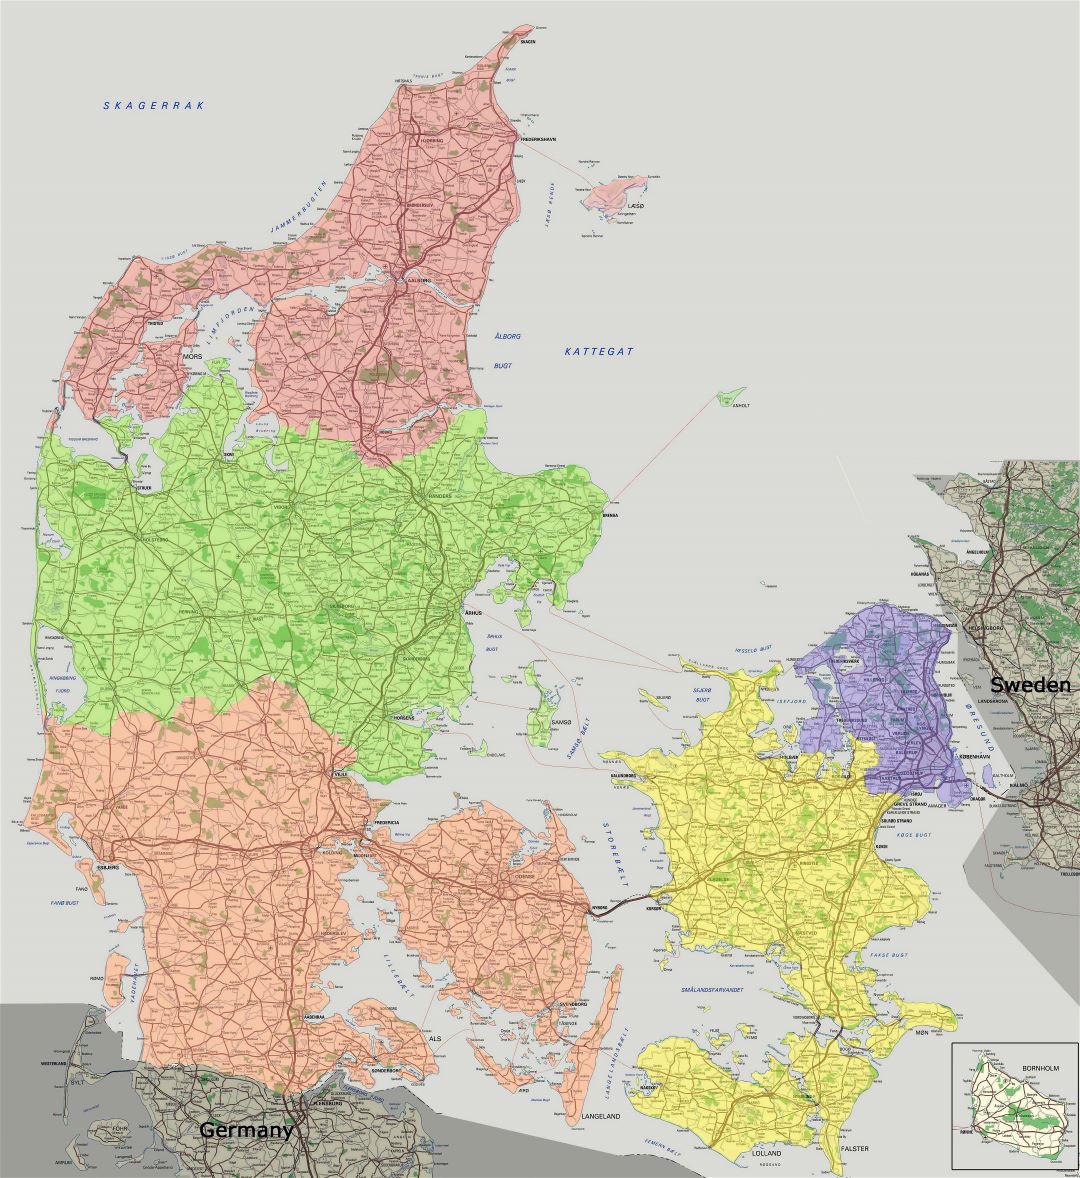 Large scale detailed road map of Denmark with all cities and villages